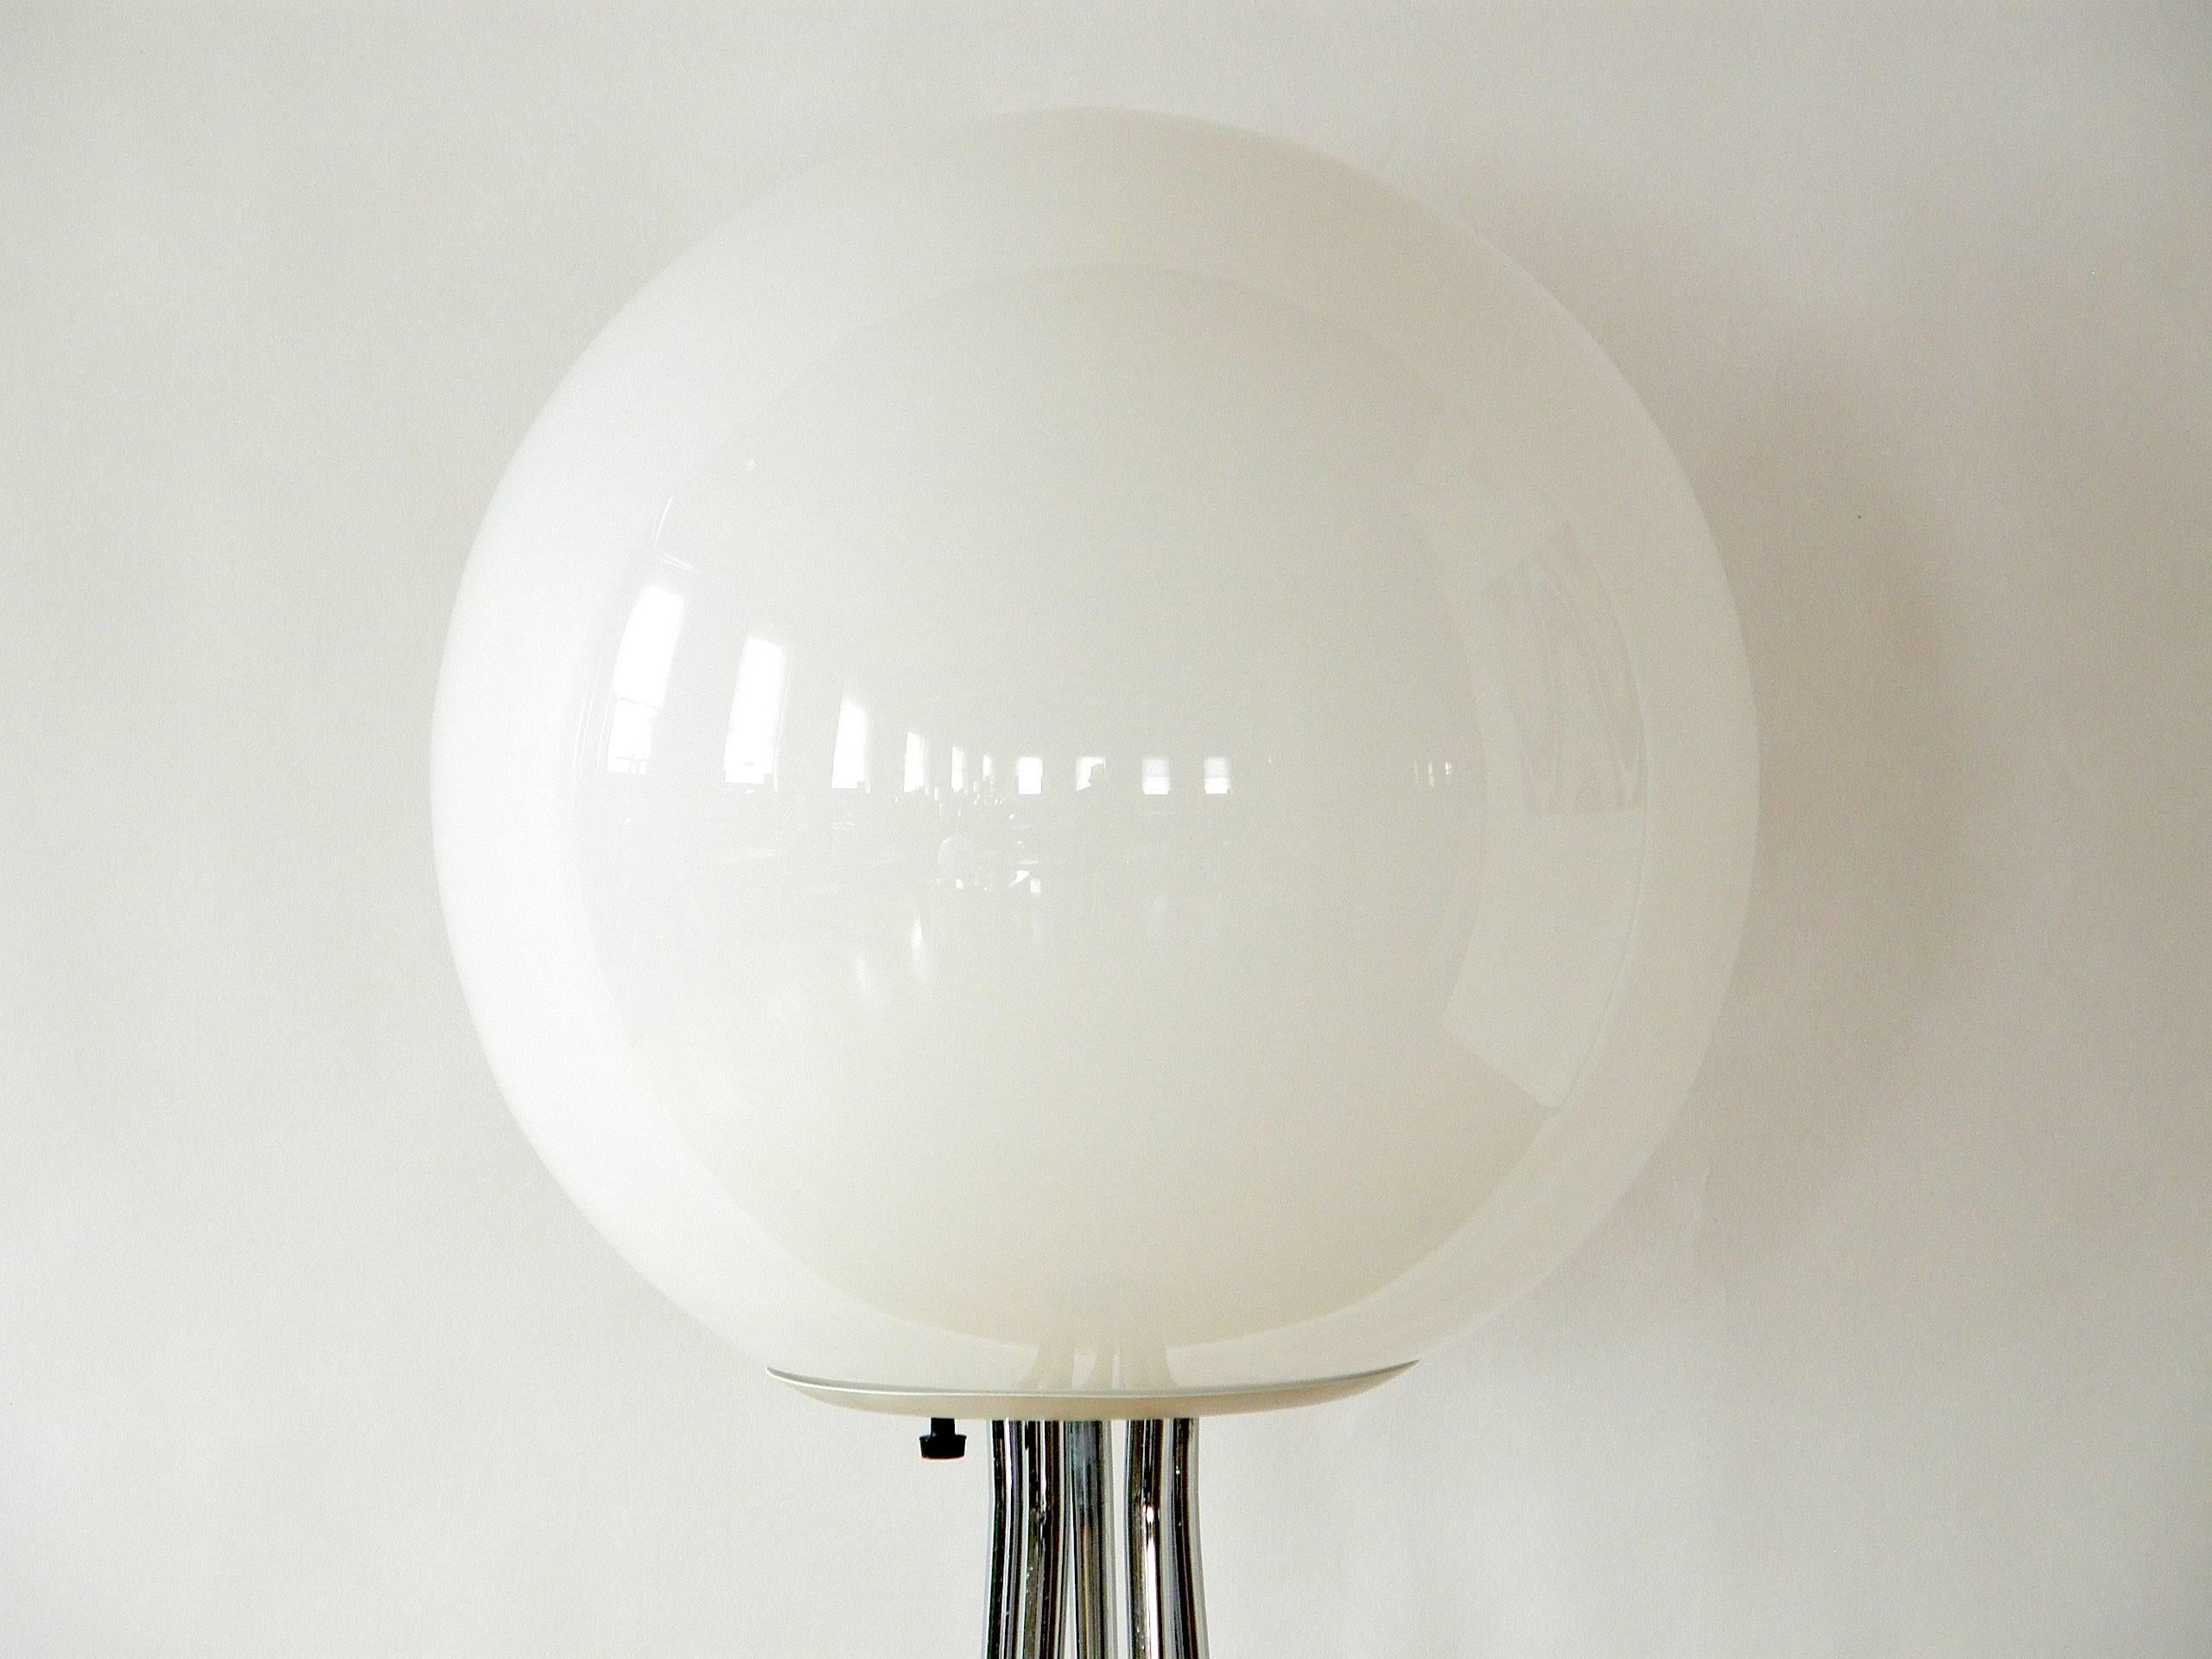 This mid-century modern floor lamp has a round black base, five chrome stems forming a tapered stand and a white glass globe shade. It throws a broad, indirect light.

Please let us know if you have any questions.